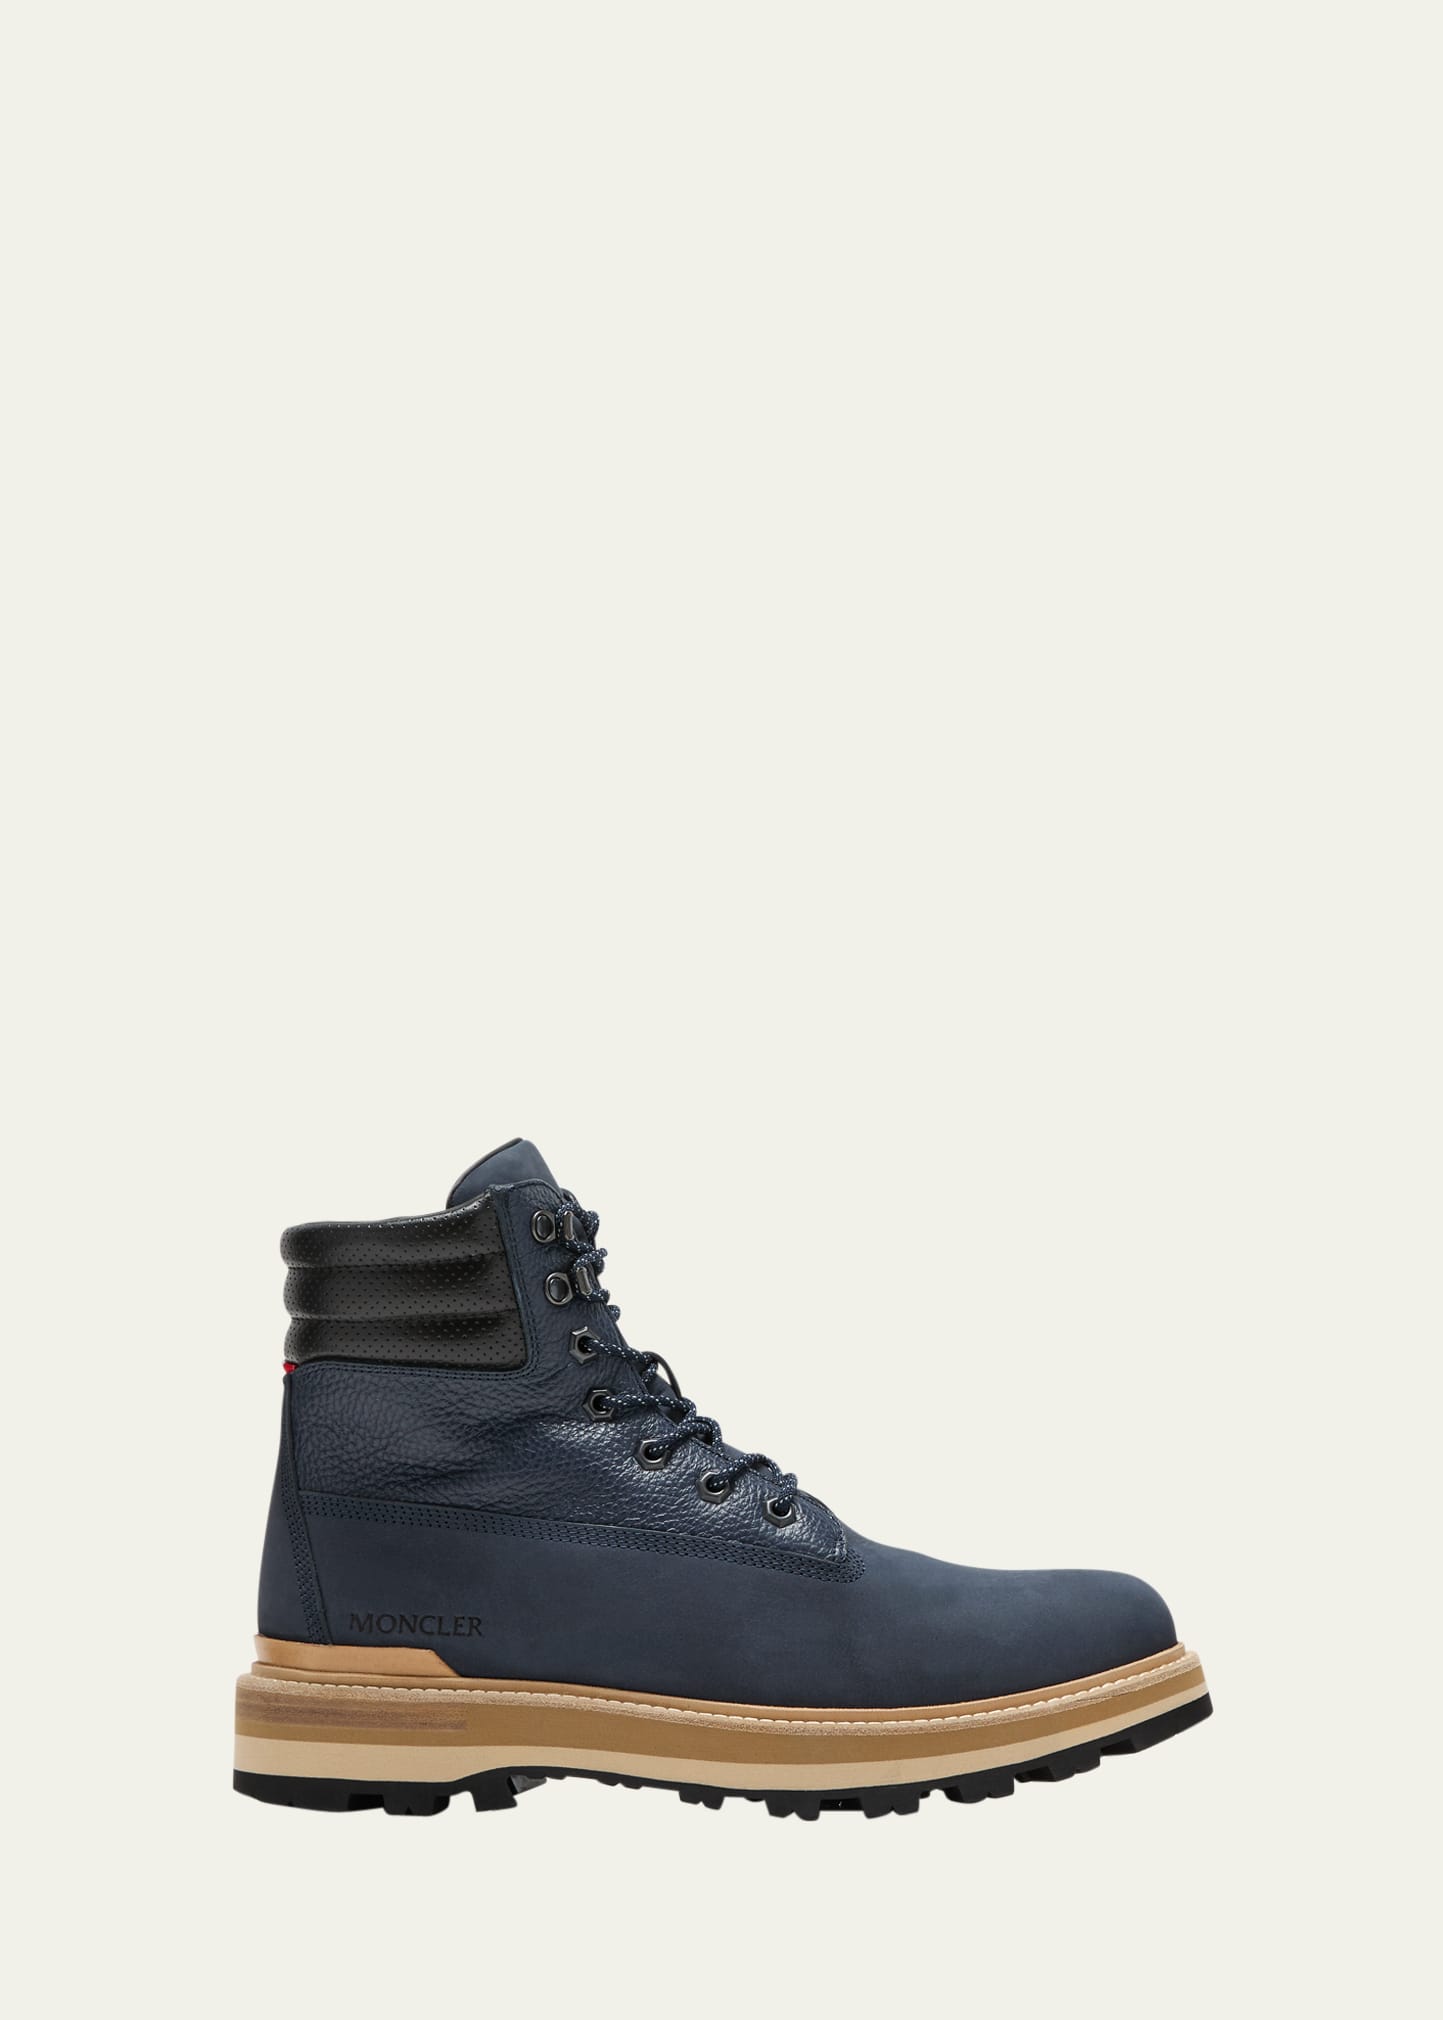 Moncler Men's Peka Suede-leather Hiking Boots In Navy